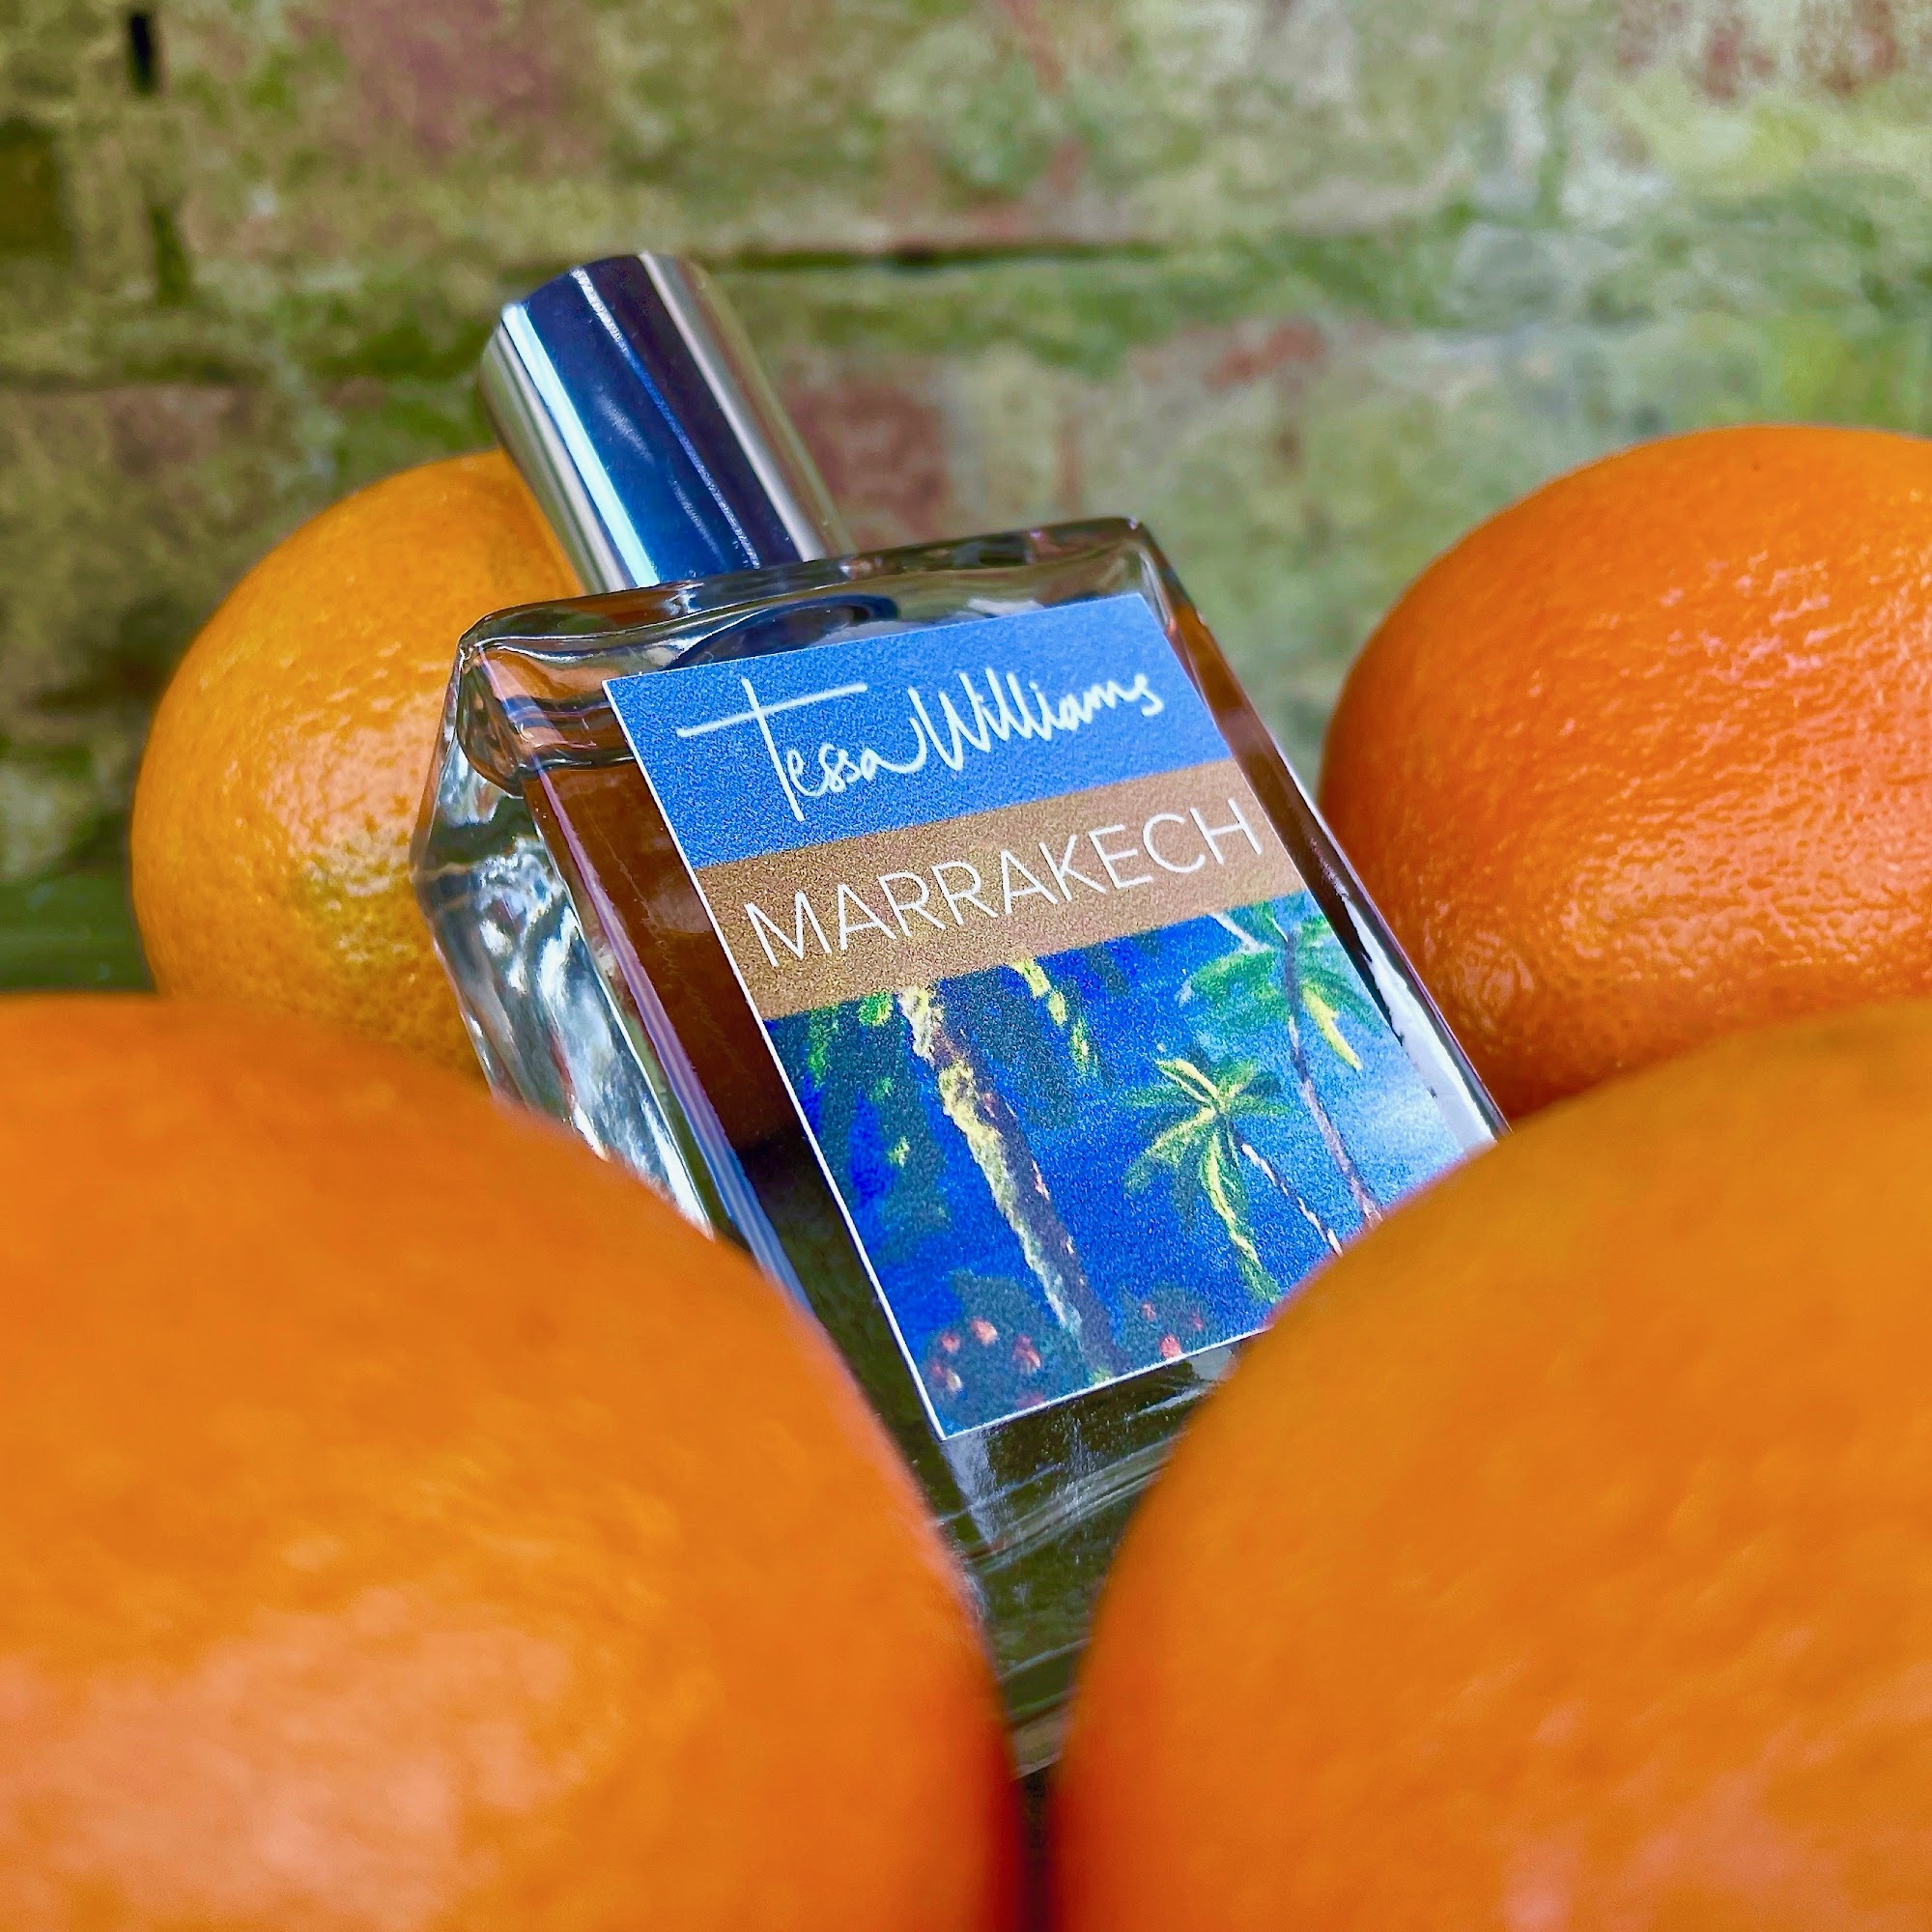 Marrakech perfume by Tessa Williams - the bottle surrounded by oranges